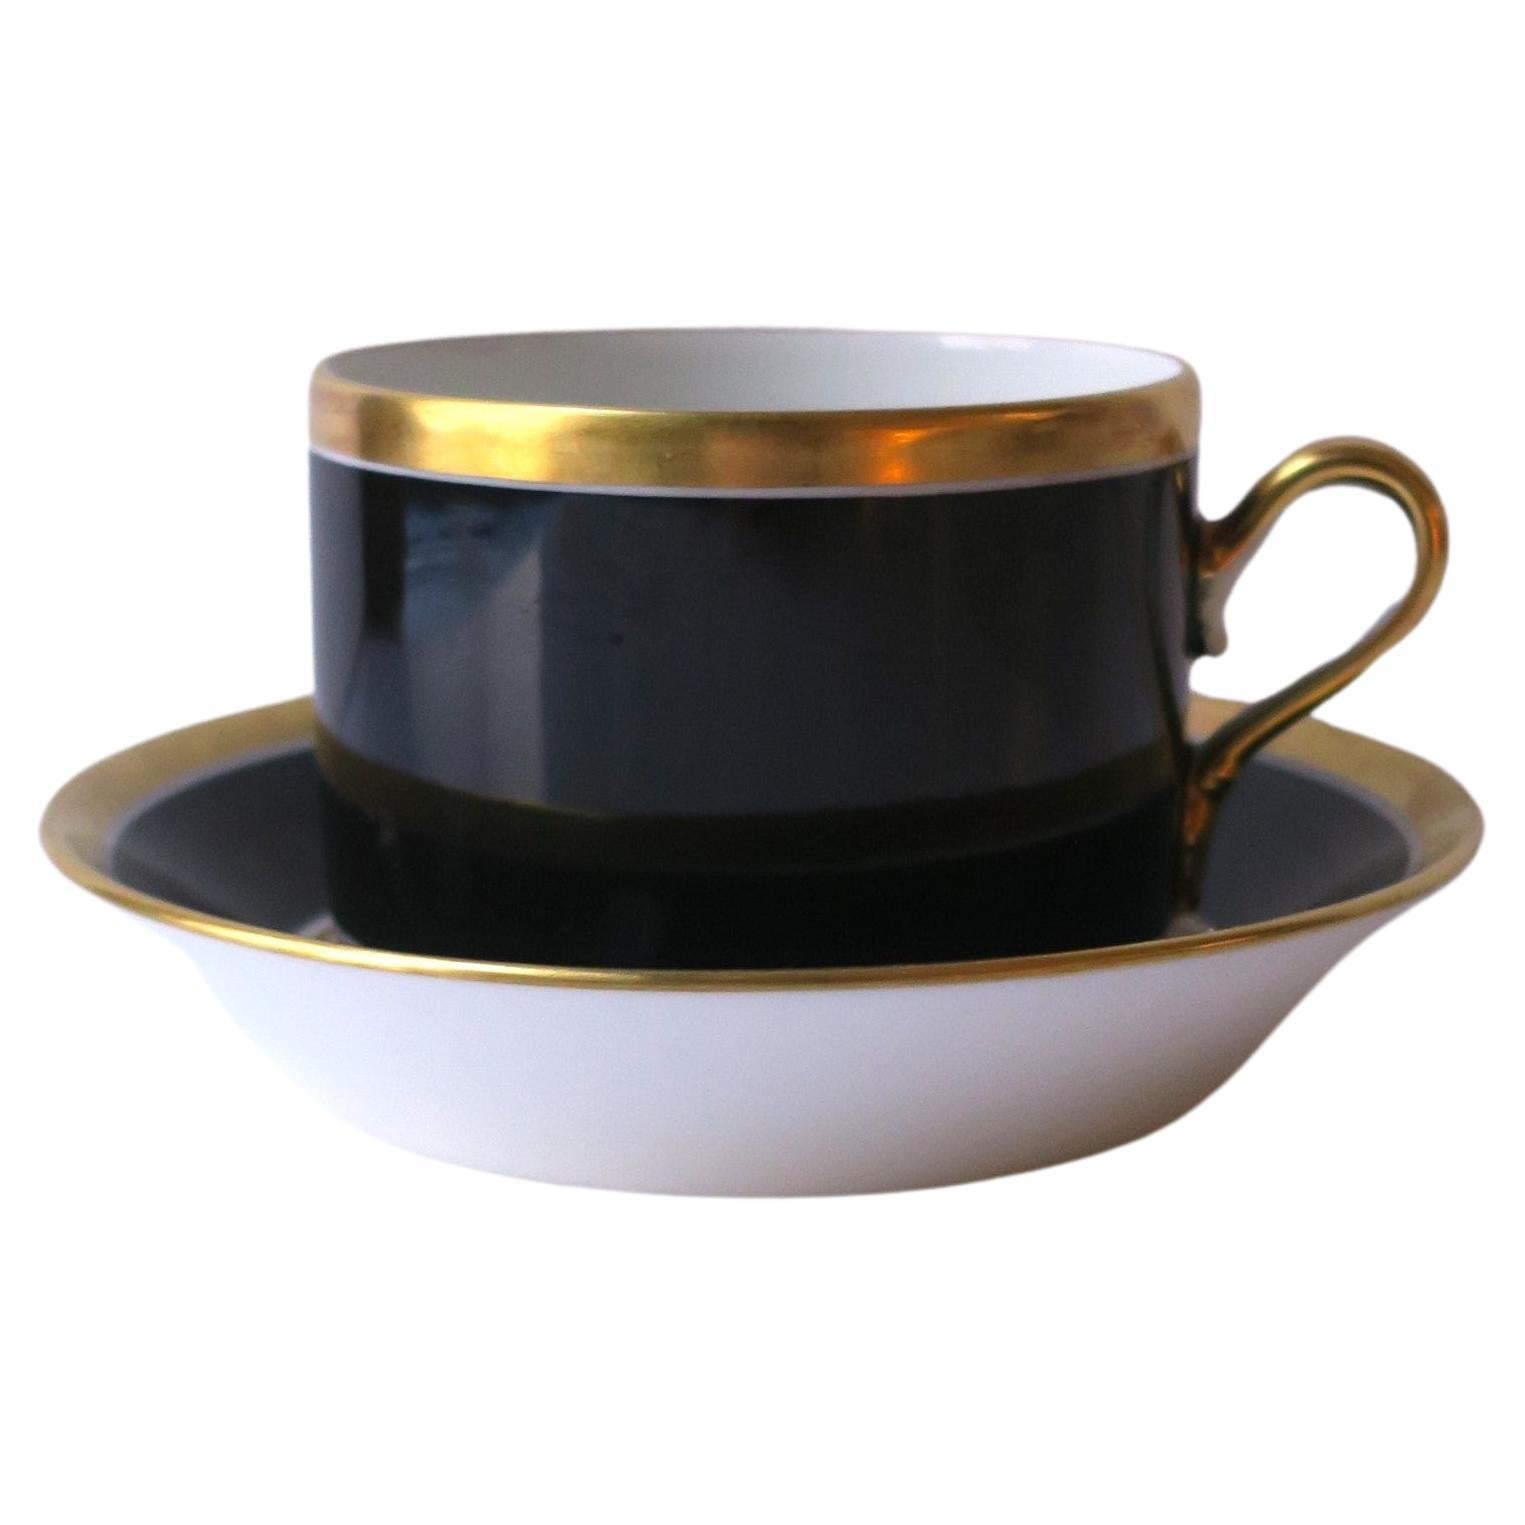 Richard Ginori Vintage Black Gold Porcelain Coffee or Tea Cup and Saucer For Sale